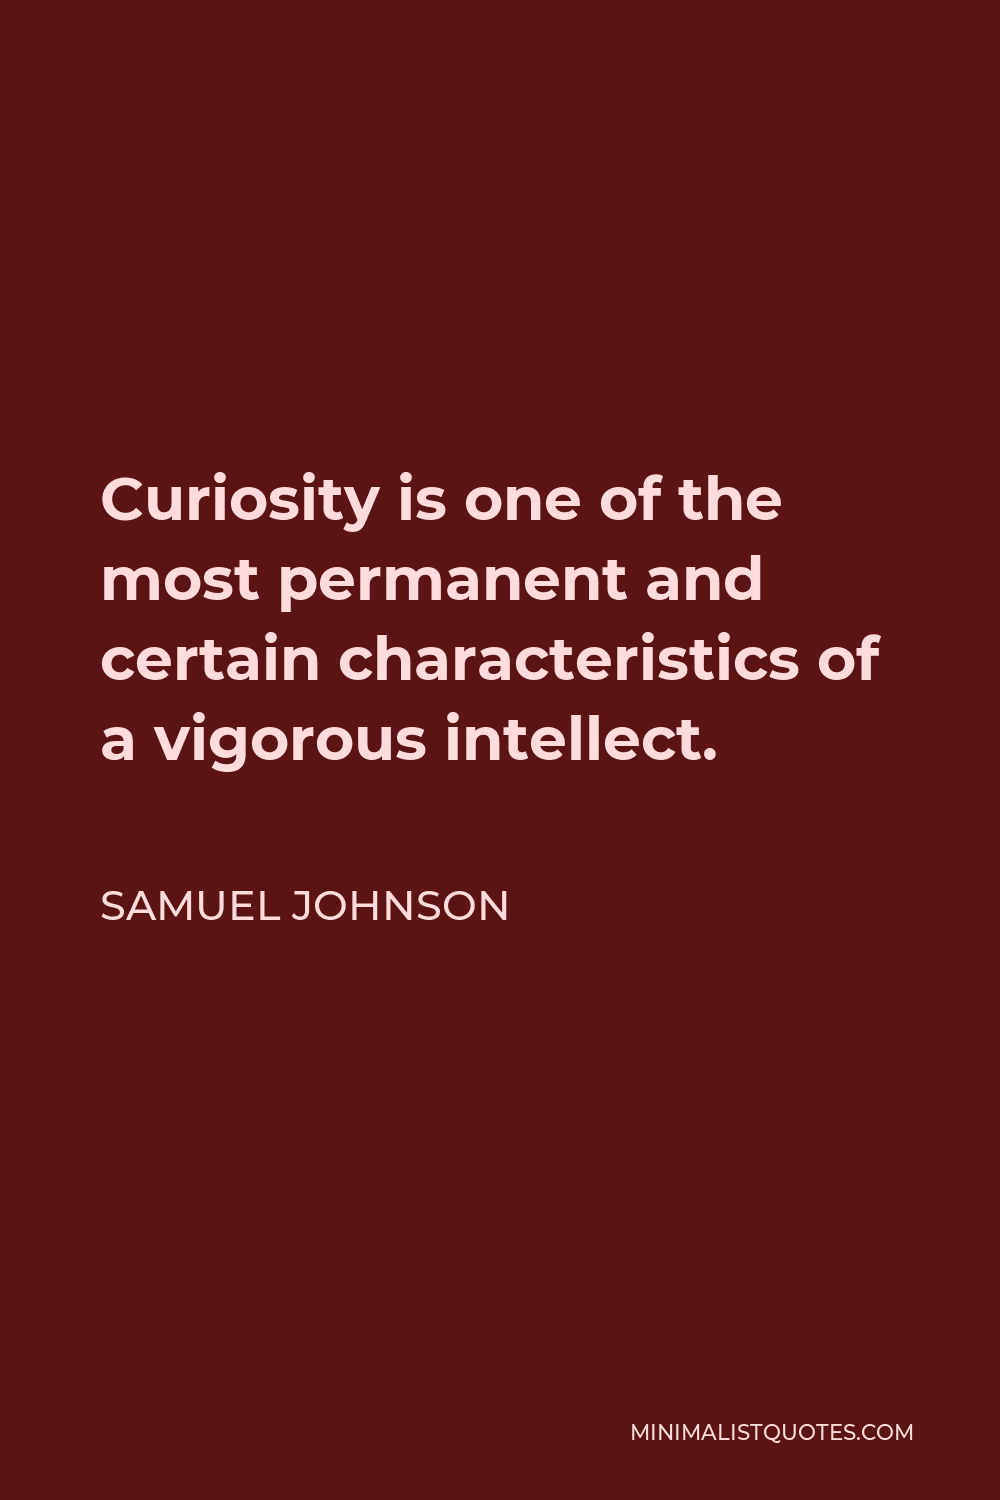 Samuel Johnson Quote - Curiosity is one of the most permanent and certain characteristics of a vigorous intellect.